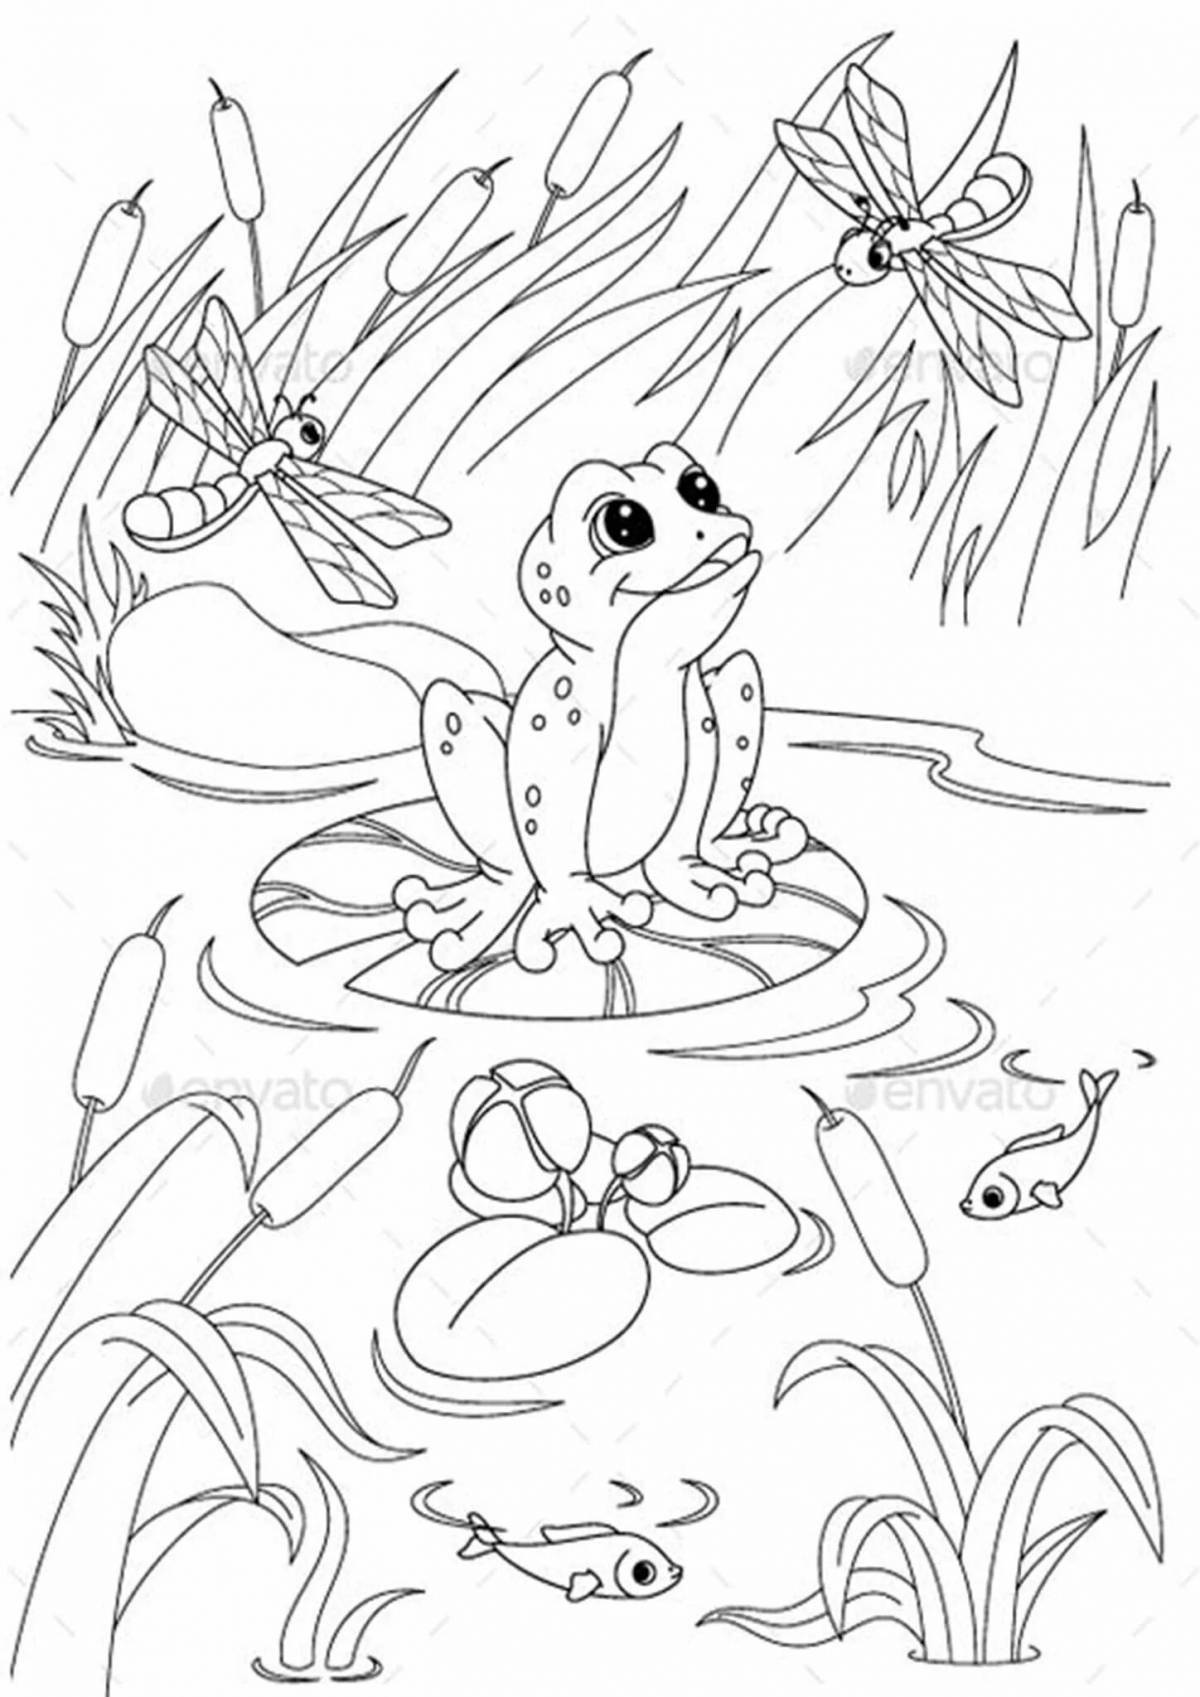 Attractive travel frog coloring pages for kids